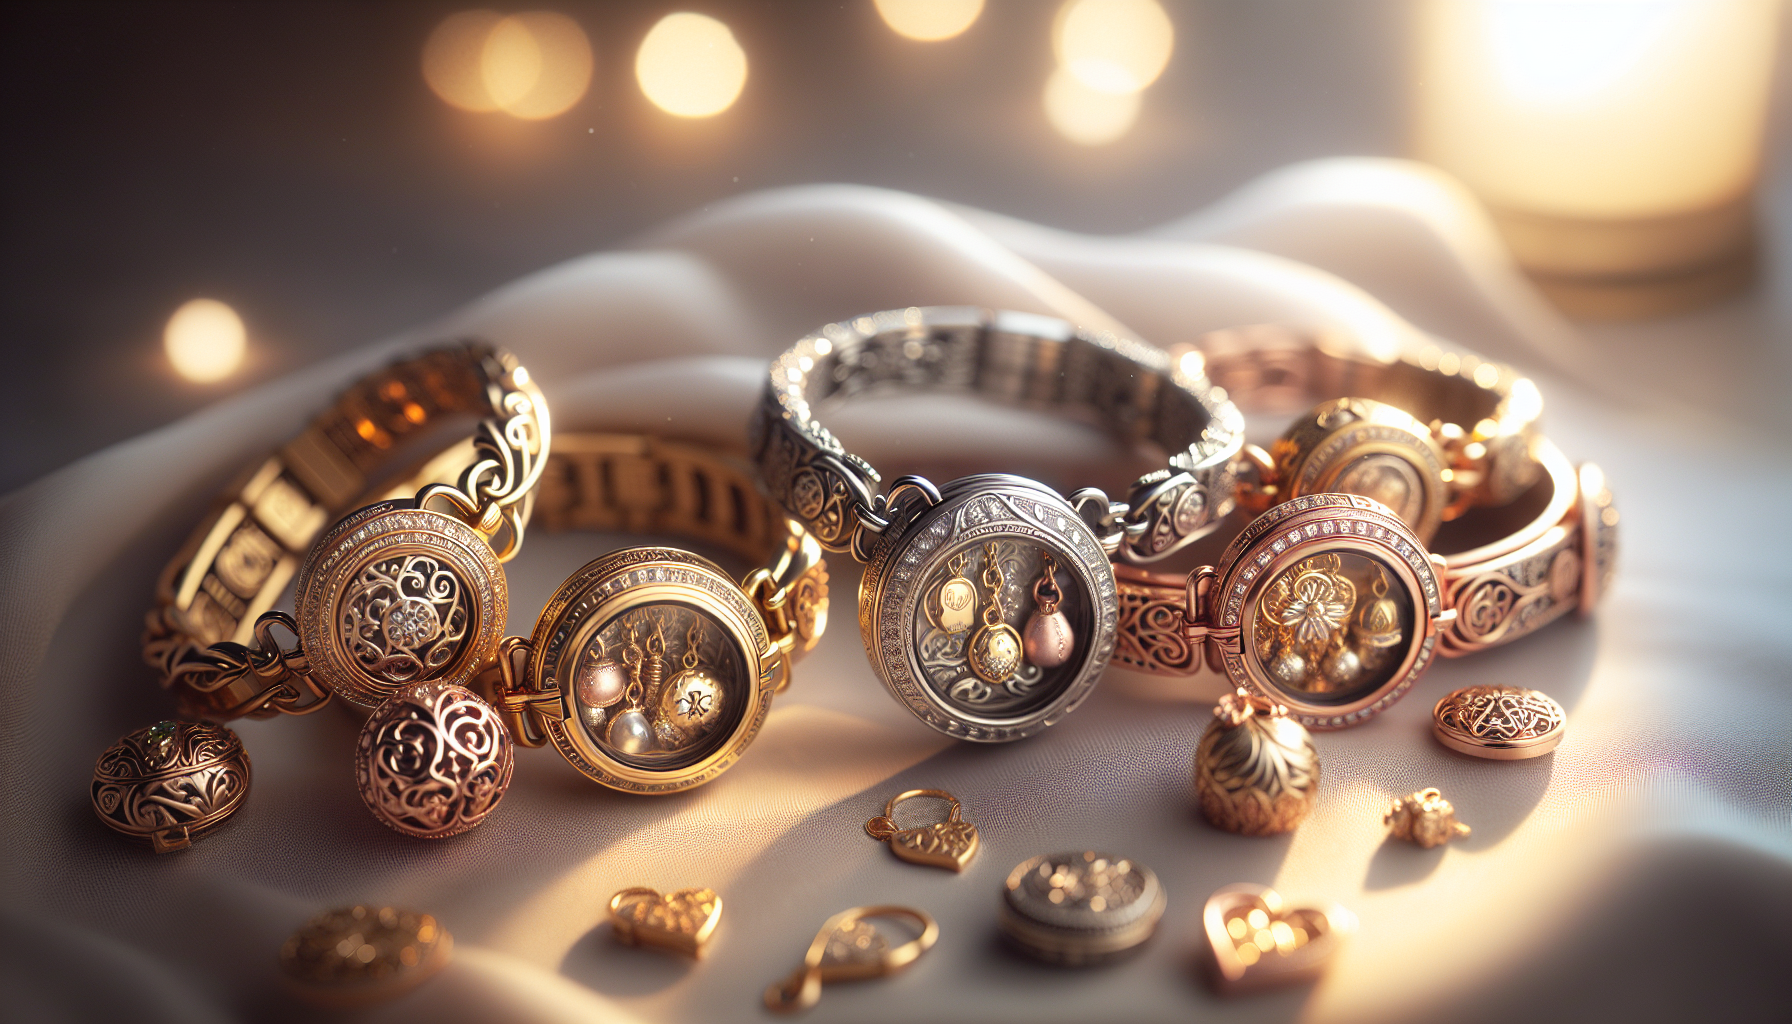 A heartwarming scene capturing the enchantment of living locket bracelets. The bracelets are ornately designed, depicting intricate details and each locket has tiny charms inside, each representative 